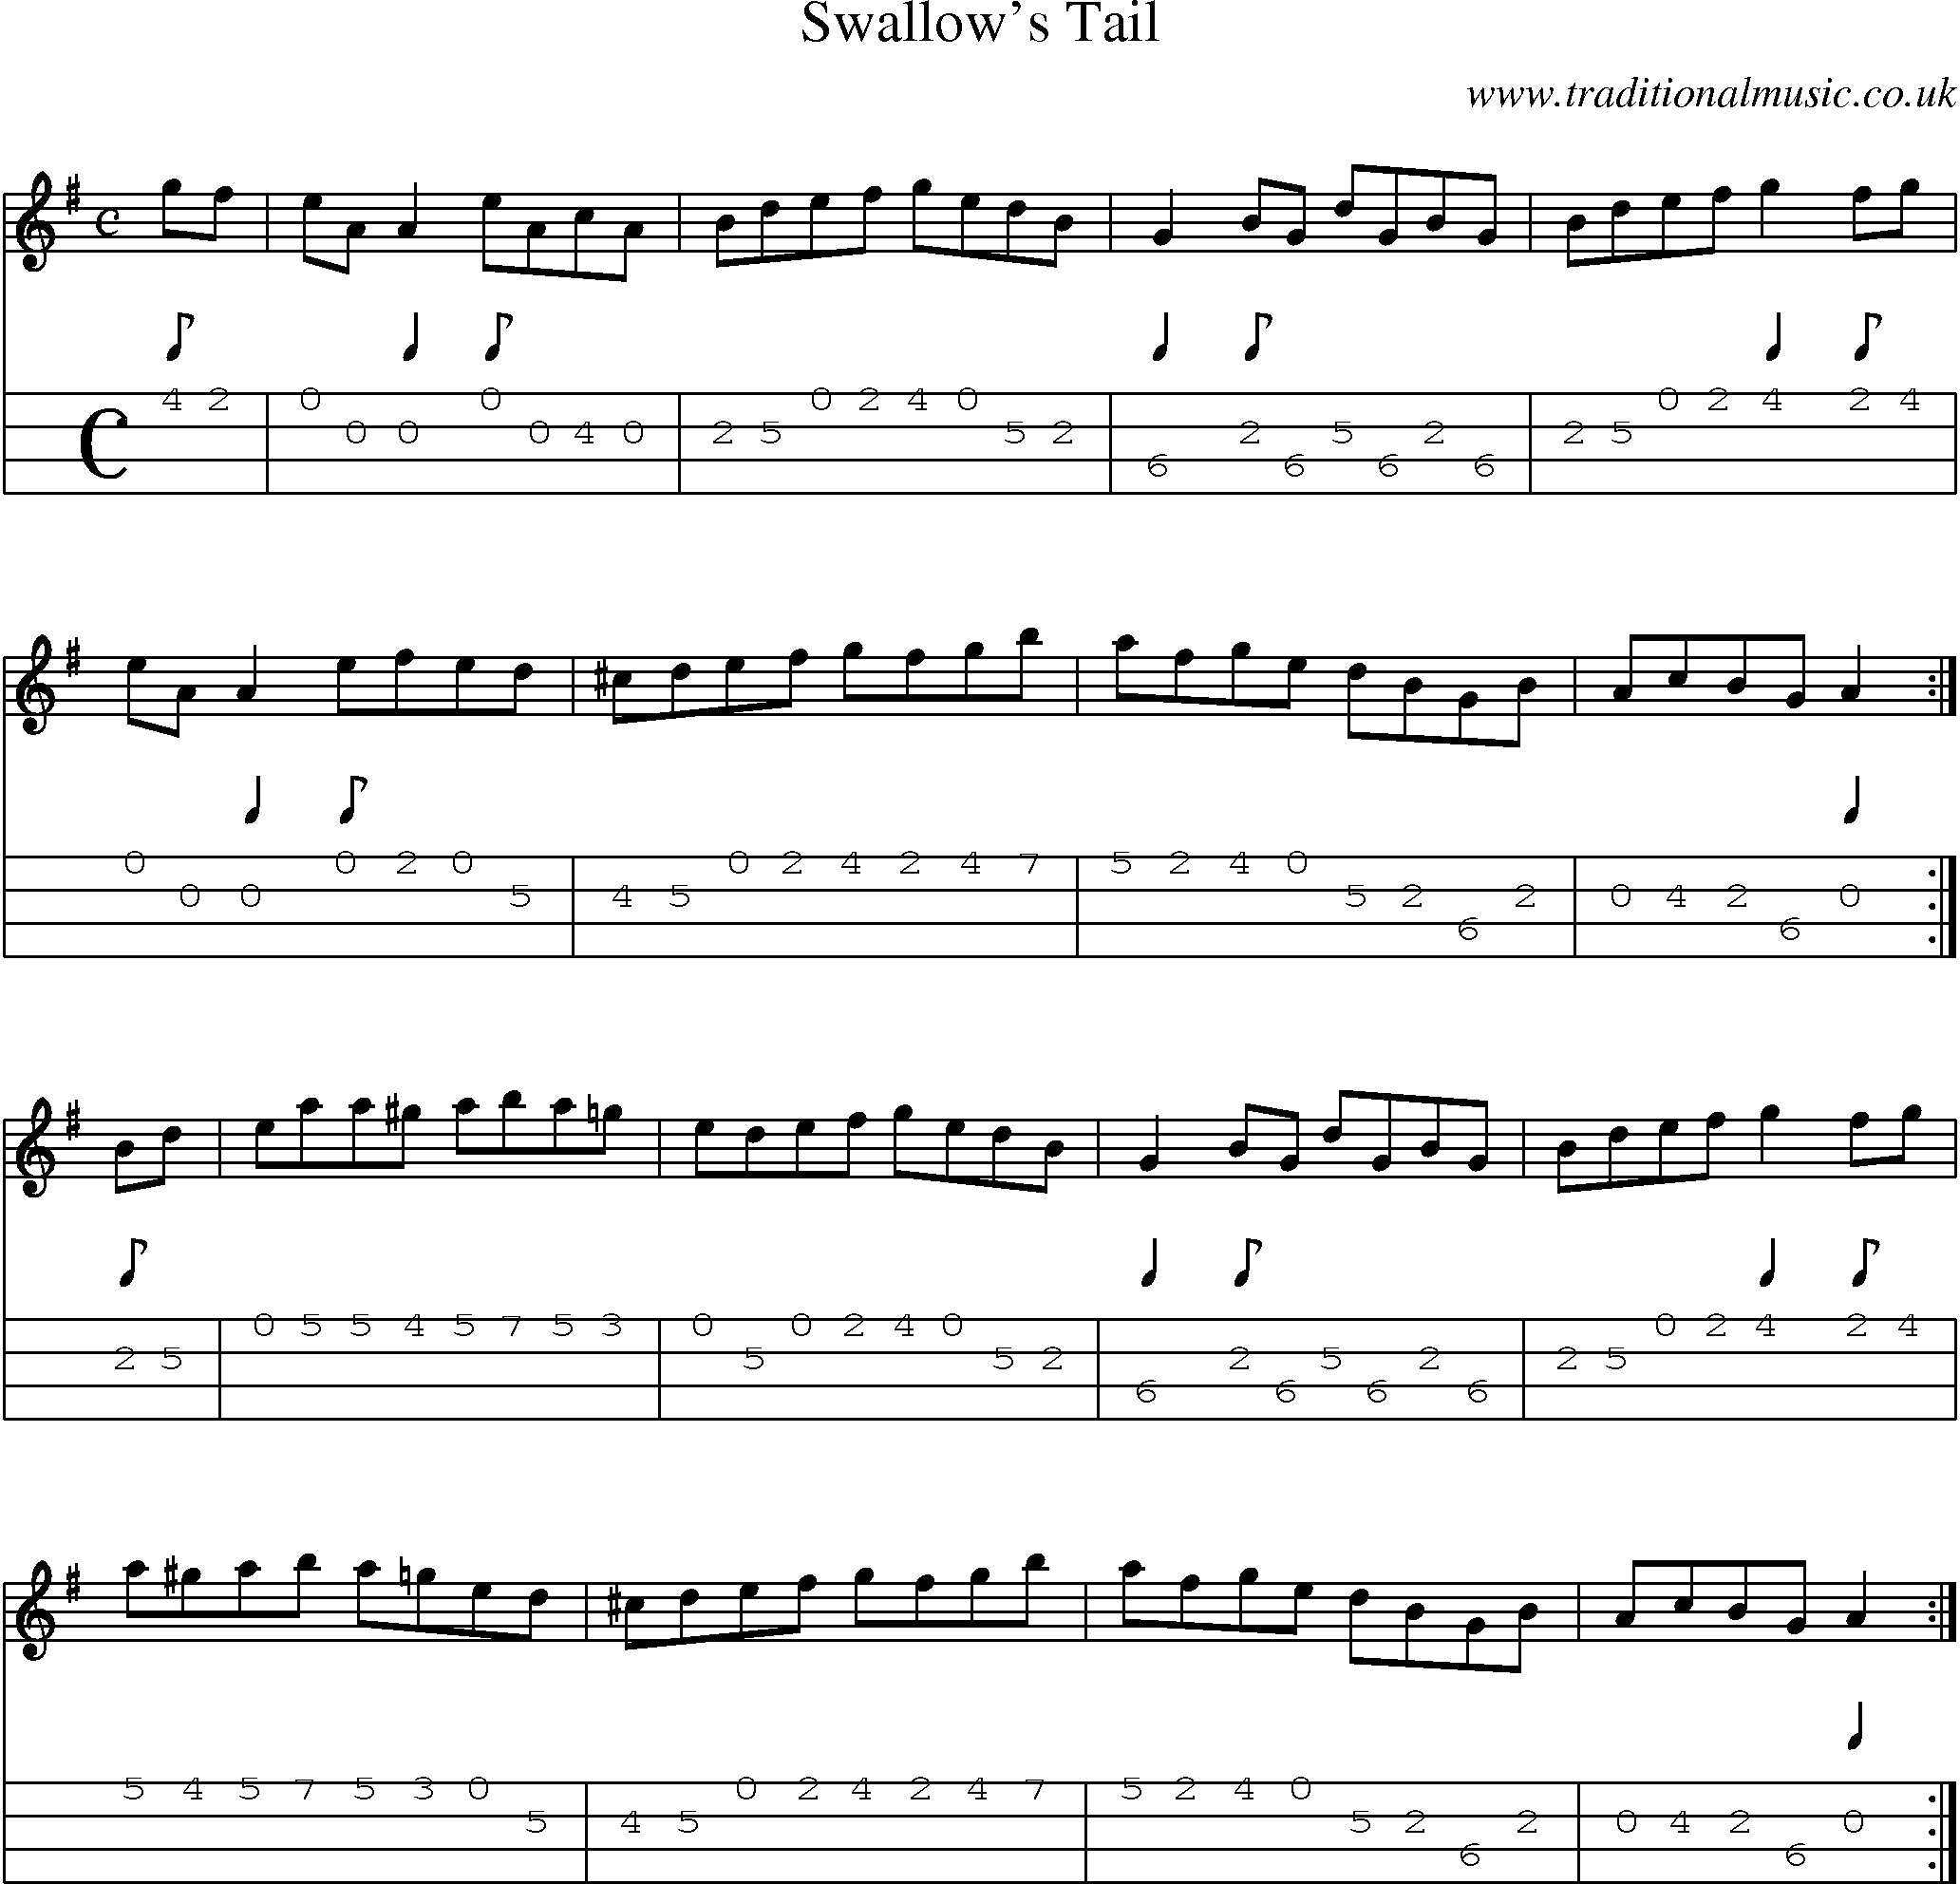 Music Score and Mandolin Tabs for Swallows Tail